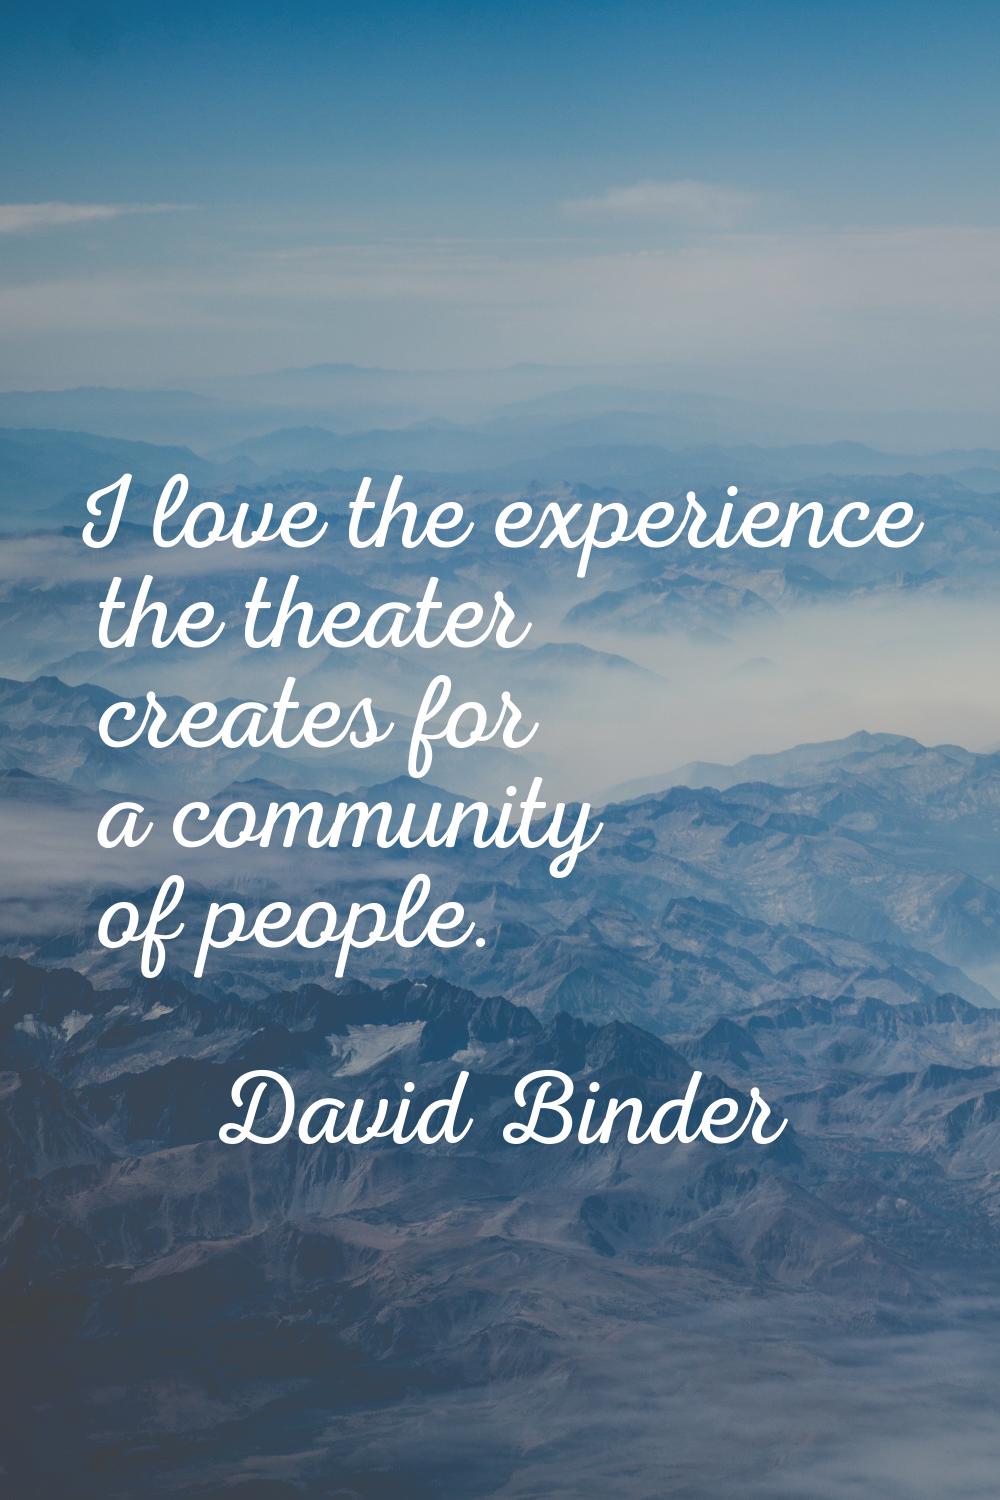 I love the experience the theater creates for a community of people.